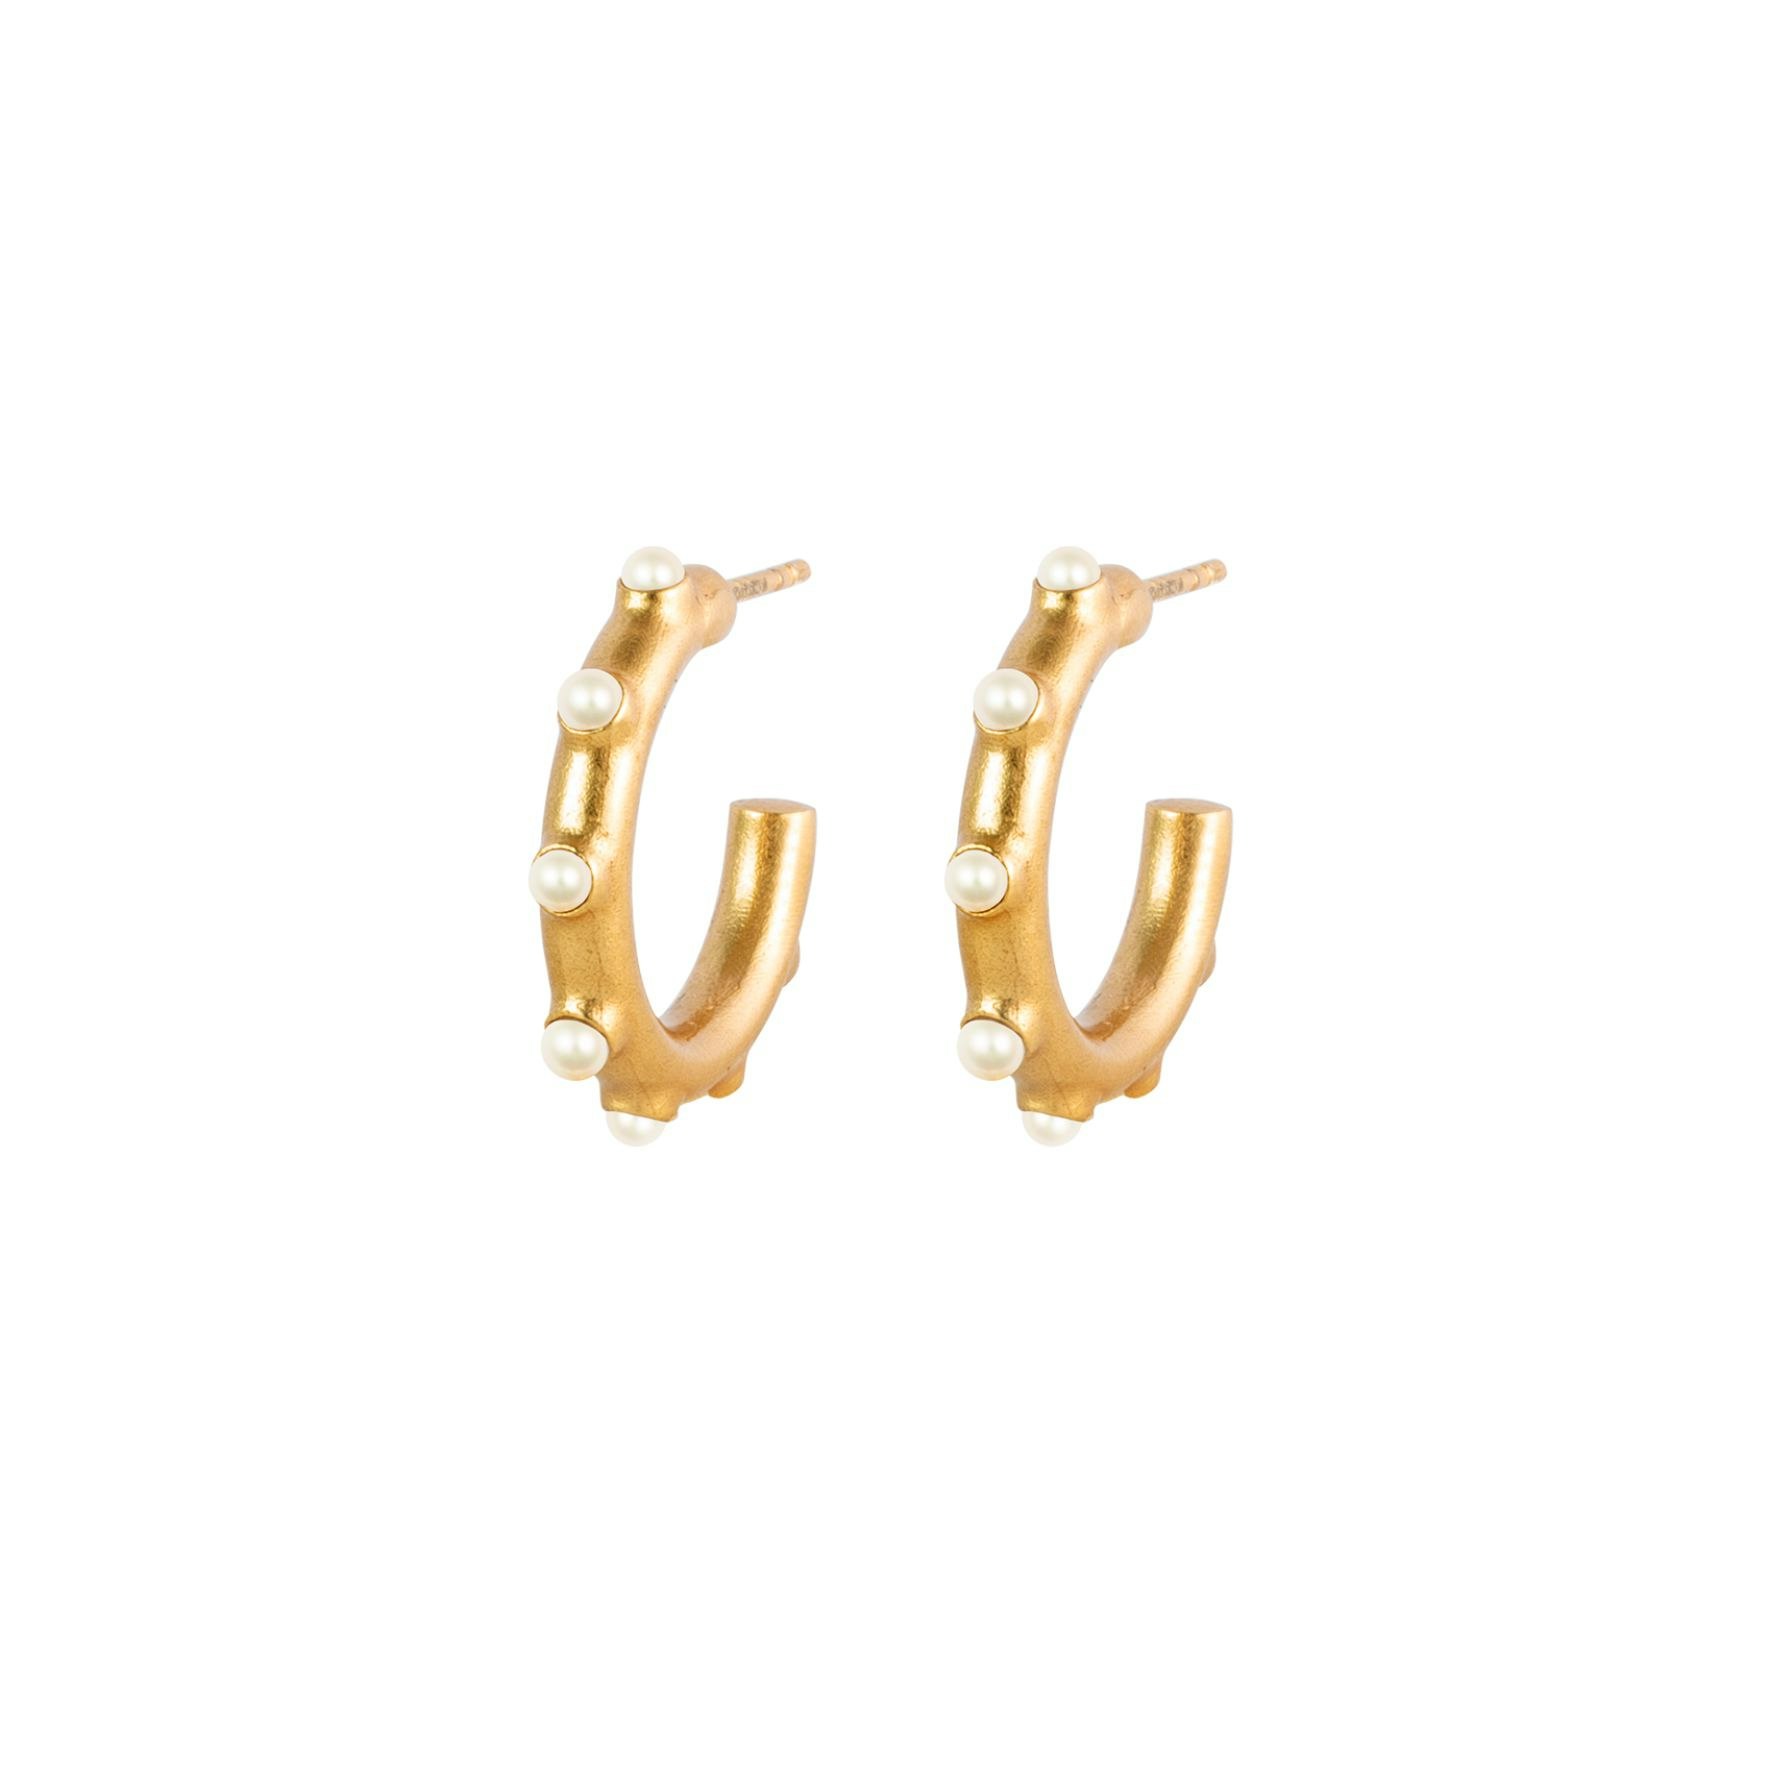 Trace Of Venus Earrings from House Of Vincent in Goldplated Silver Sterling 925